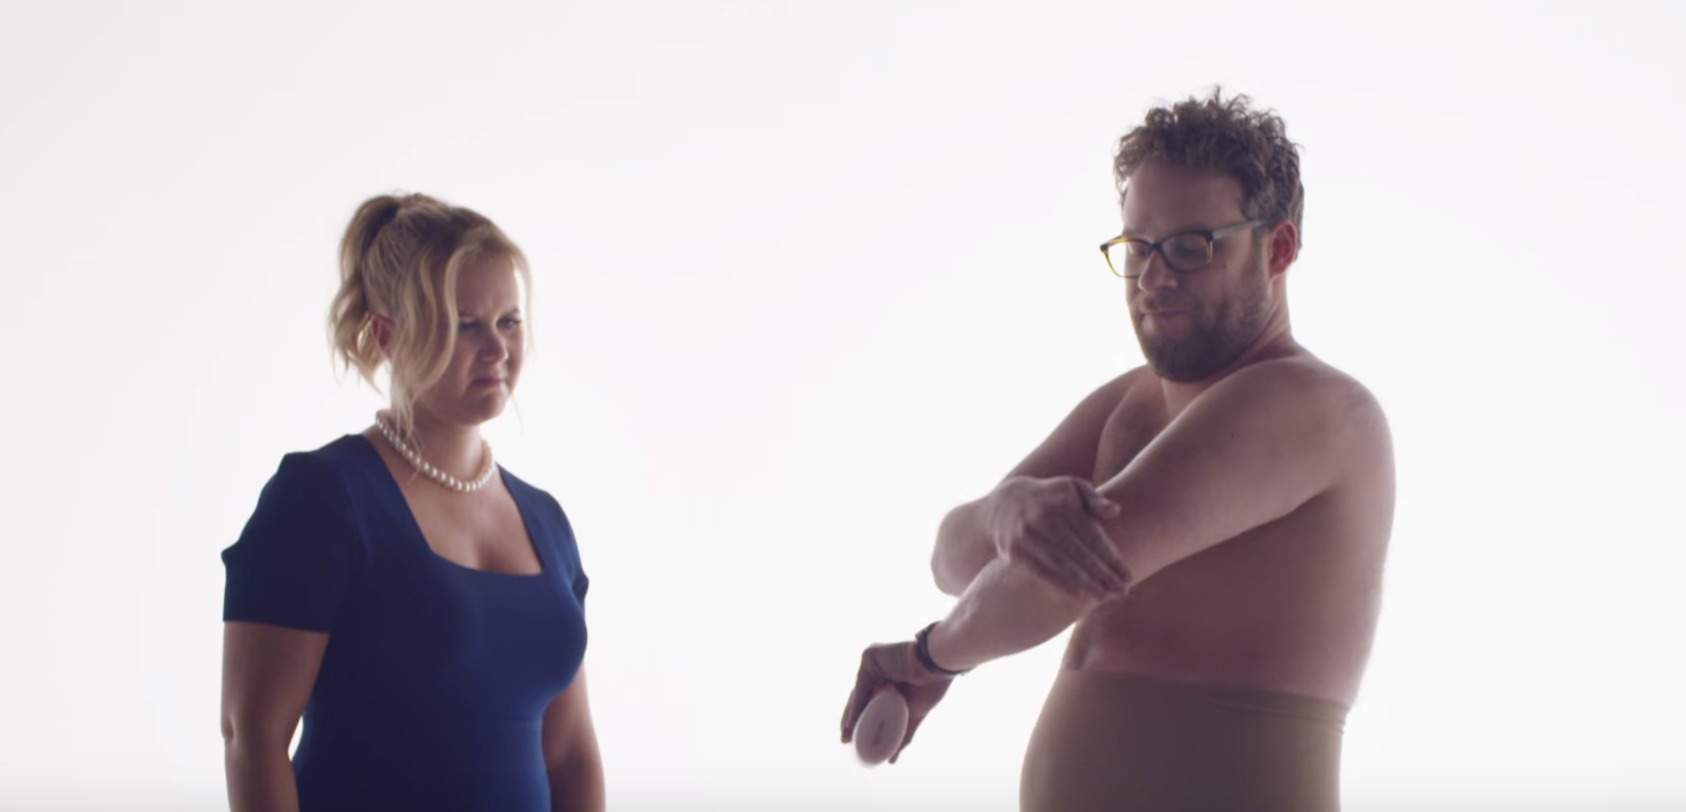 picture-of-amy-schumer-and-seth-rogen-bud-light-party-lotion-photo.jpg